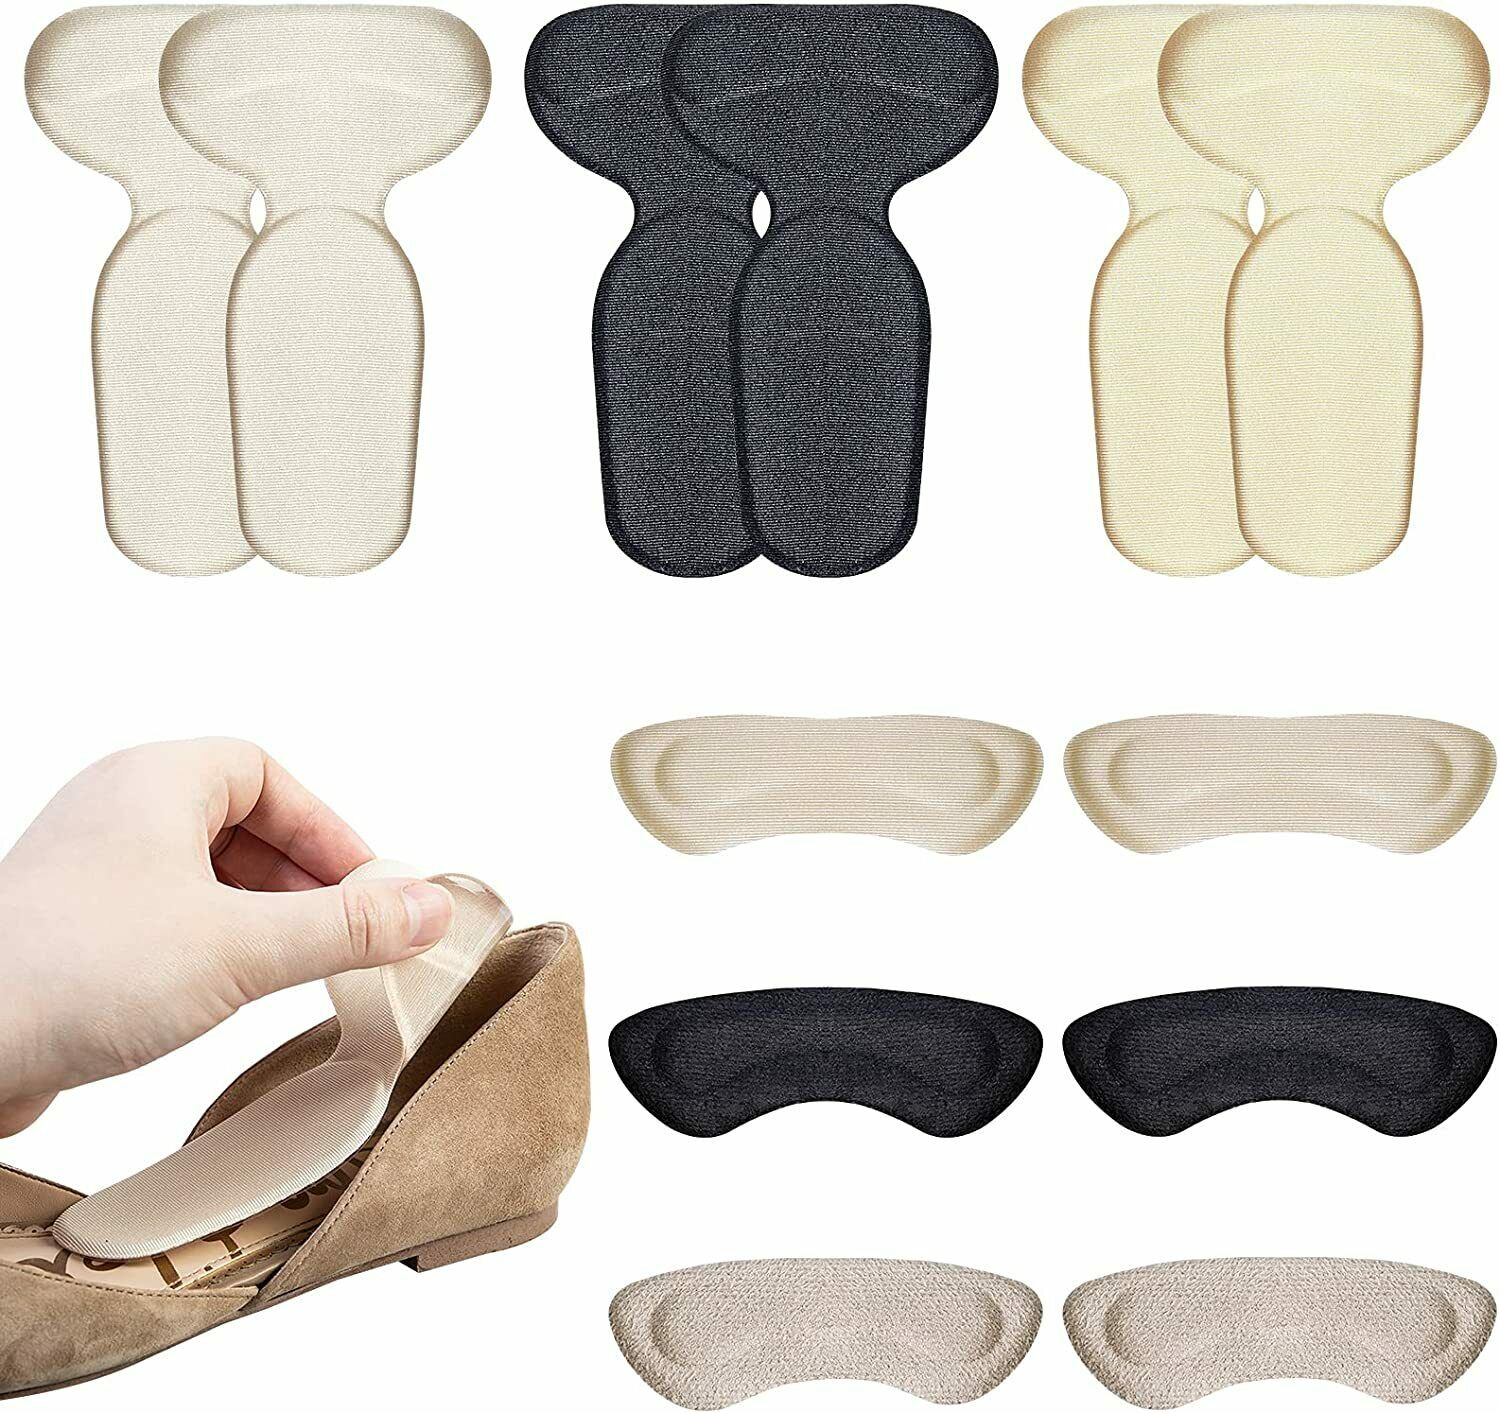 Heel Inserts for Women, 6 Pairs Self-Adhesive Heel Pads Shoes Too Big Inserts